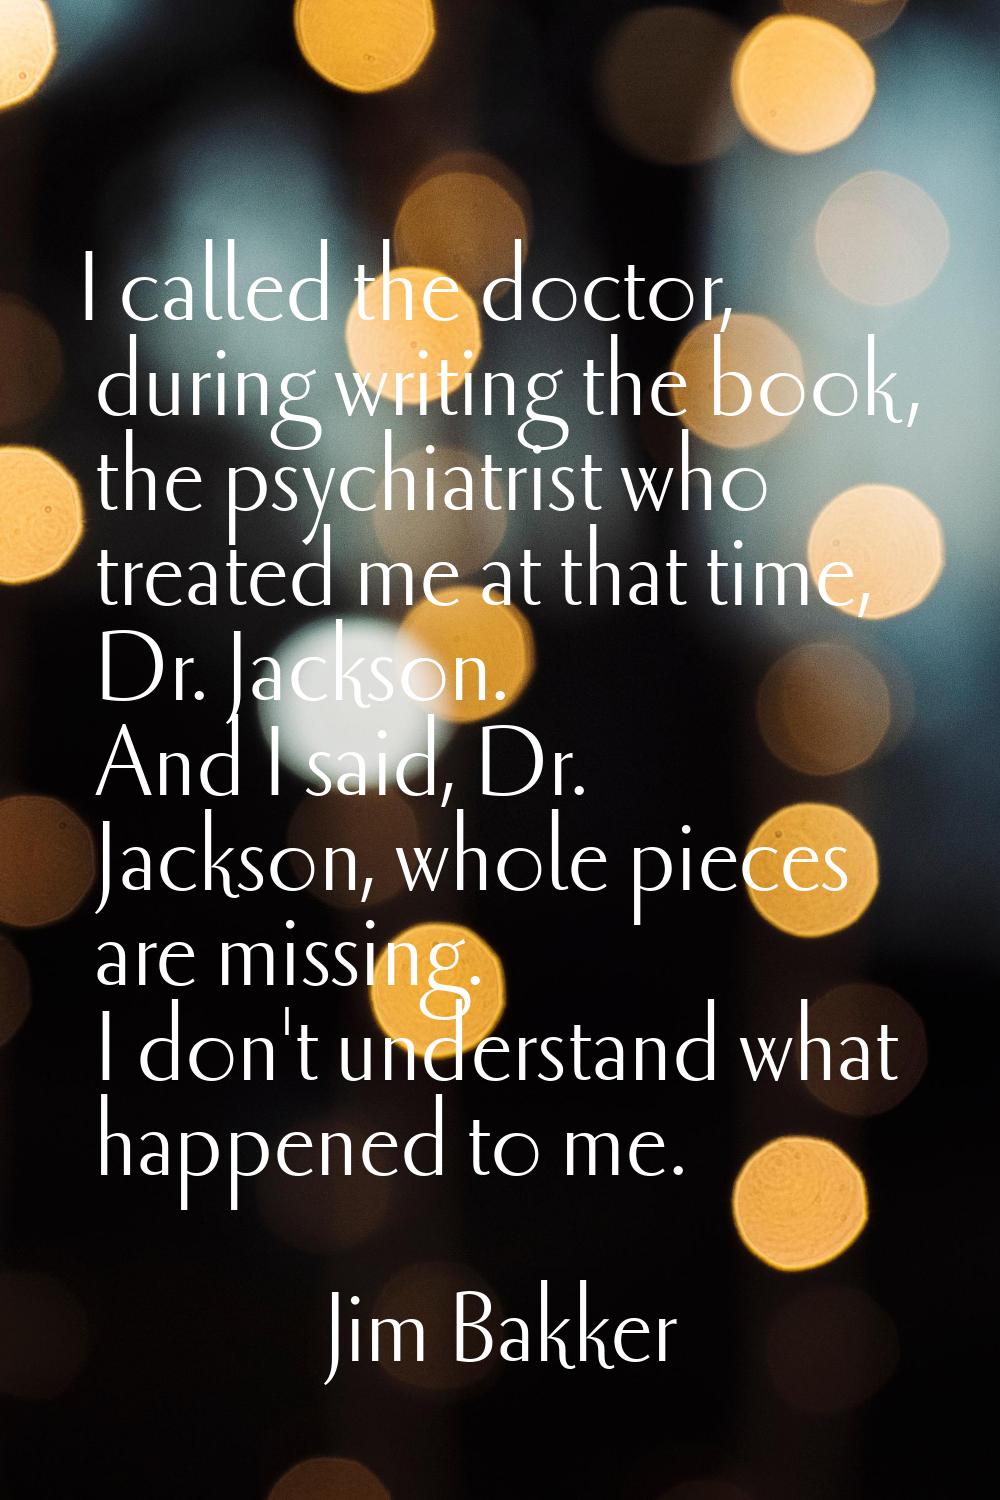 I called the doctor, during writing the book, the psychiatrist who treated me at that time, Dr. Jac